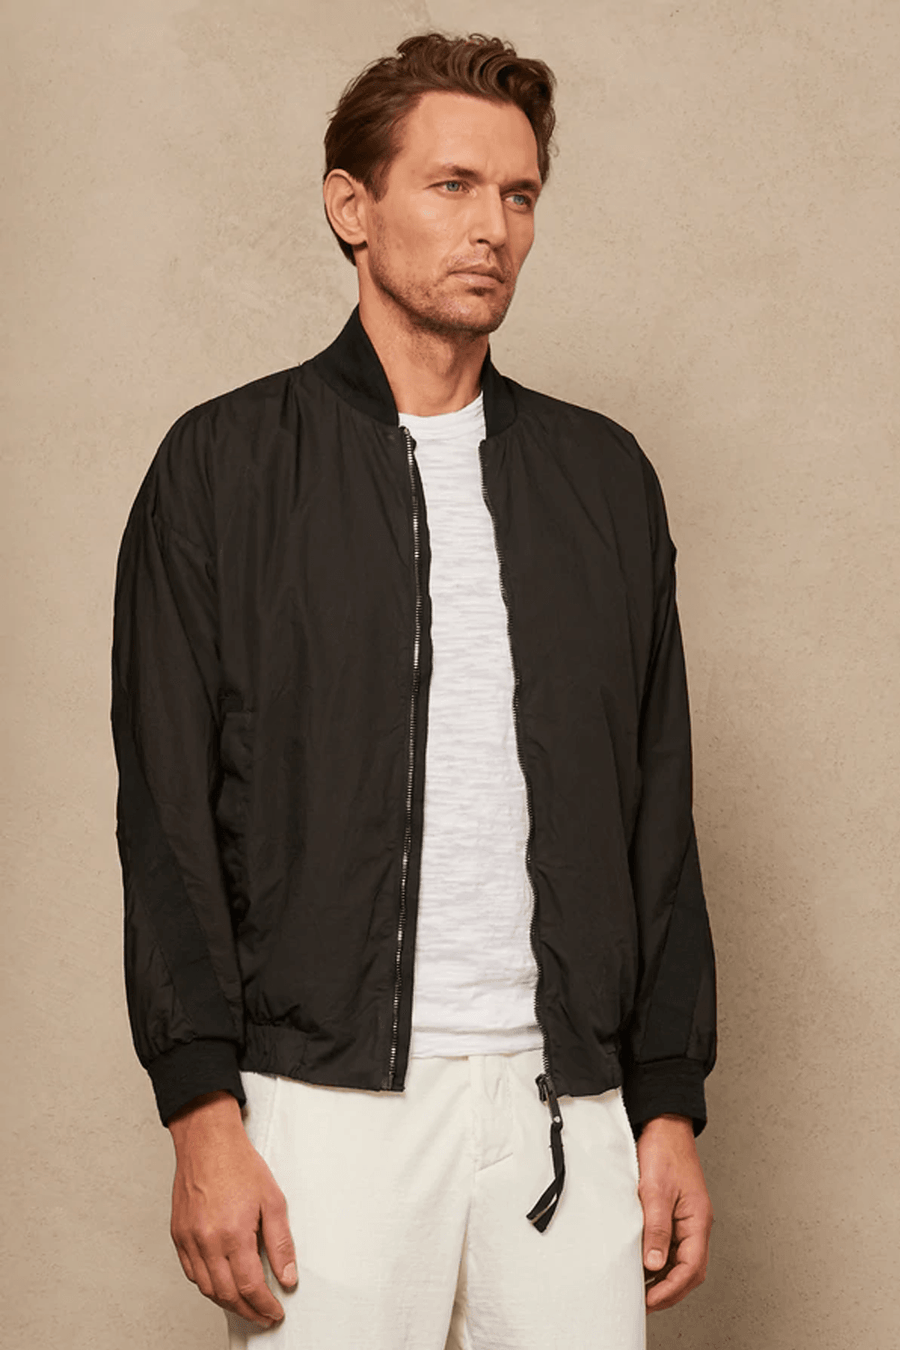 Buy the Transit Zip-Up Bomber Jacket in Black at Intro. Spend £50 for free UK delivery. Official stockists. We ship worldwide.